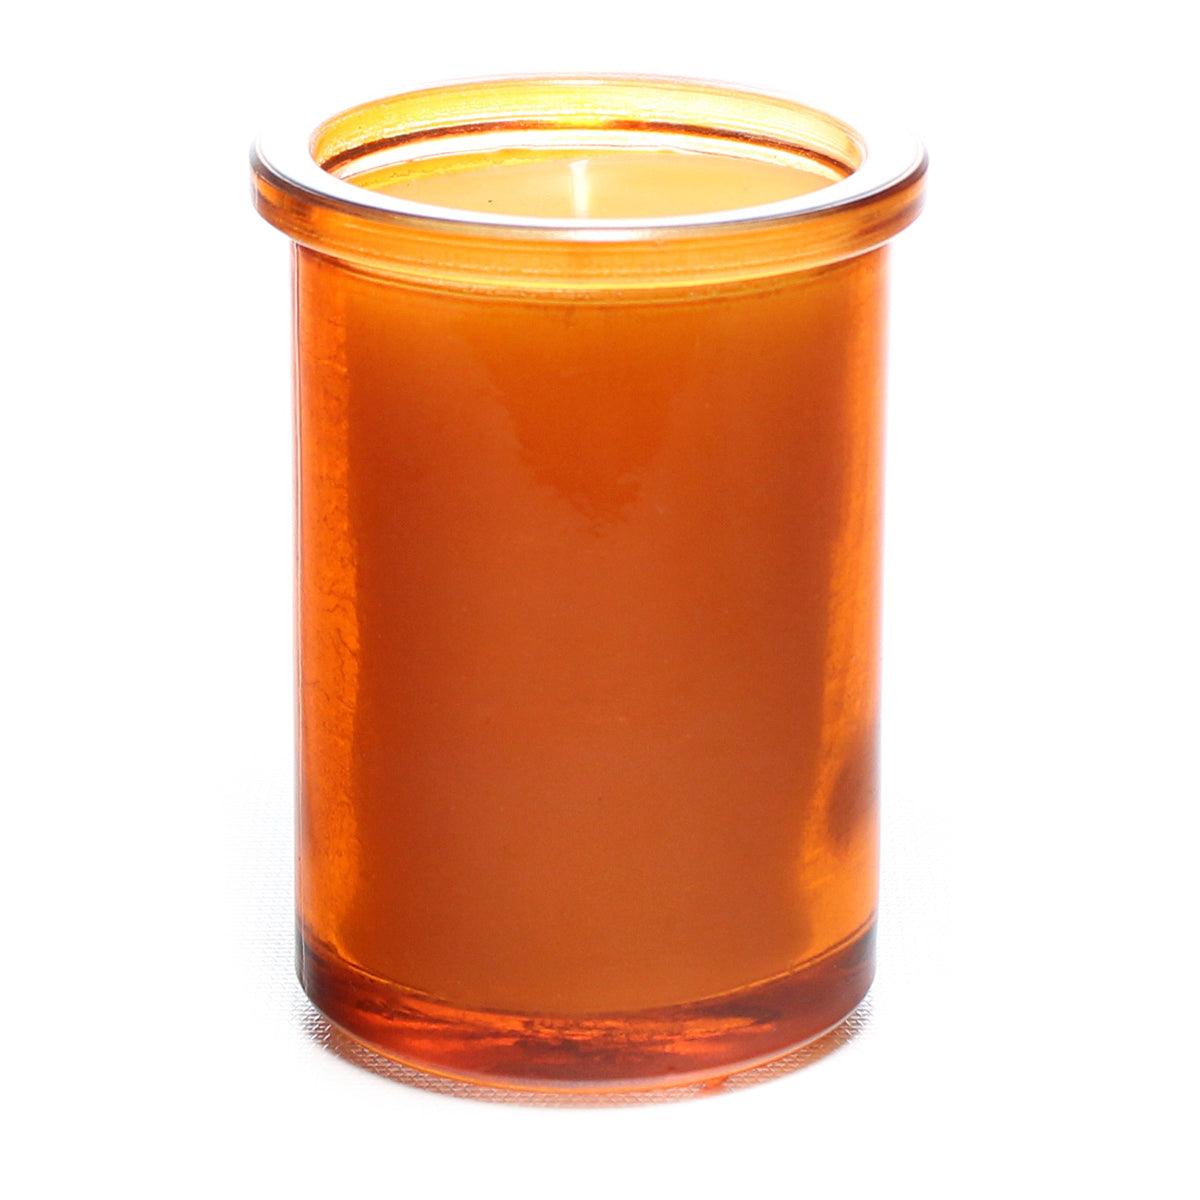 Bluecorn Beeswax 100% Pure Beeswax Orange 6oz Glass Candle. Burn Time: 35 hours. Wax is golden in color with a light honey scent. Made with 100% Pure Beeswax and a 100% pure cotton wick, no lead. Candles are paraffin free, clean burning and non-toxic. Features 6oz candle with Bluecorn Beeswax hang tag printed on white 100% recyled paper with gold foil. For best burn, burn candle until wax pool reaches glass wall and trim wick to 1/4 before lighting.